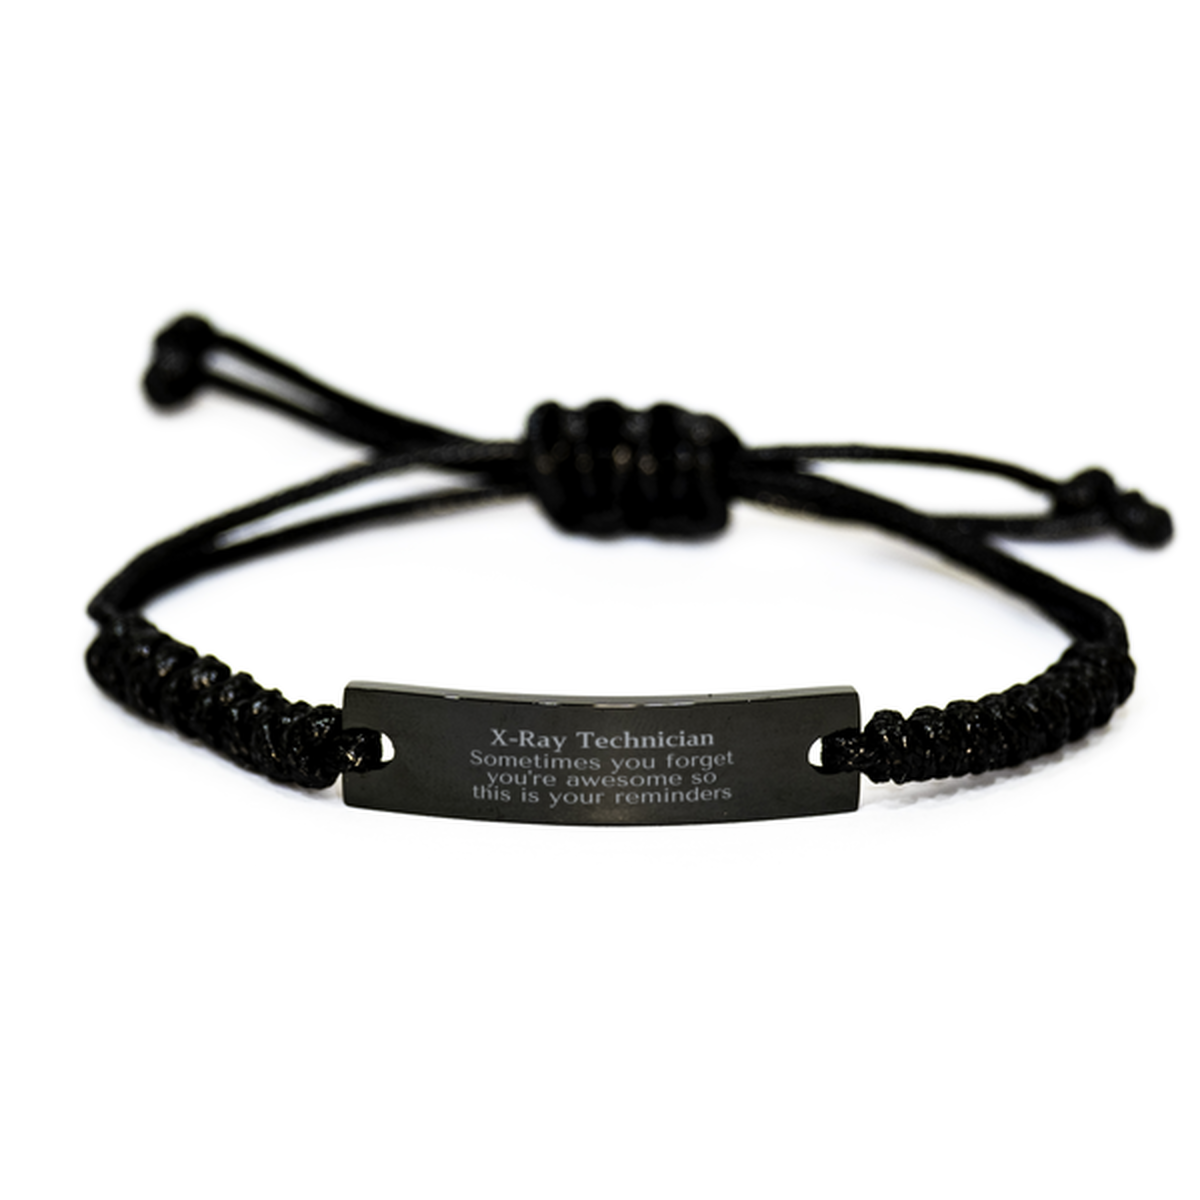 Sentimental X-Ray Technician Black Rope Bracelet, X-Ray Technician Sometimes you forget you're awesome so this is your reminders, Graduation Christmas Birthday Gifts for X-Ray Technician, Men, Women, Coworkers